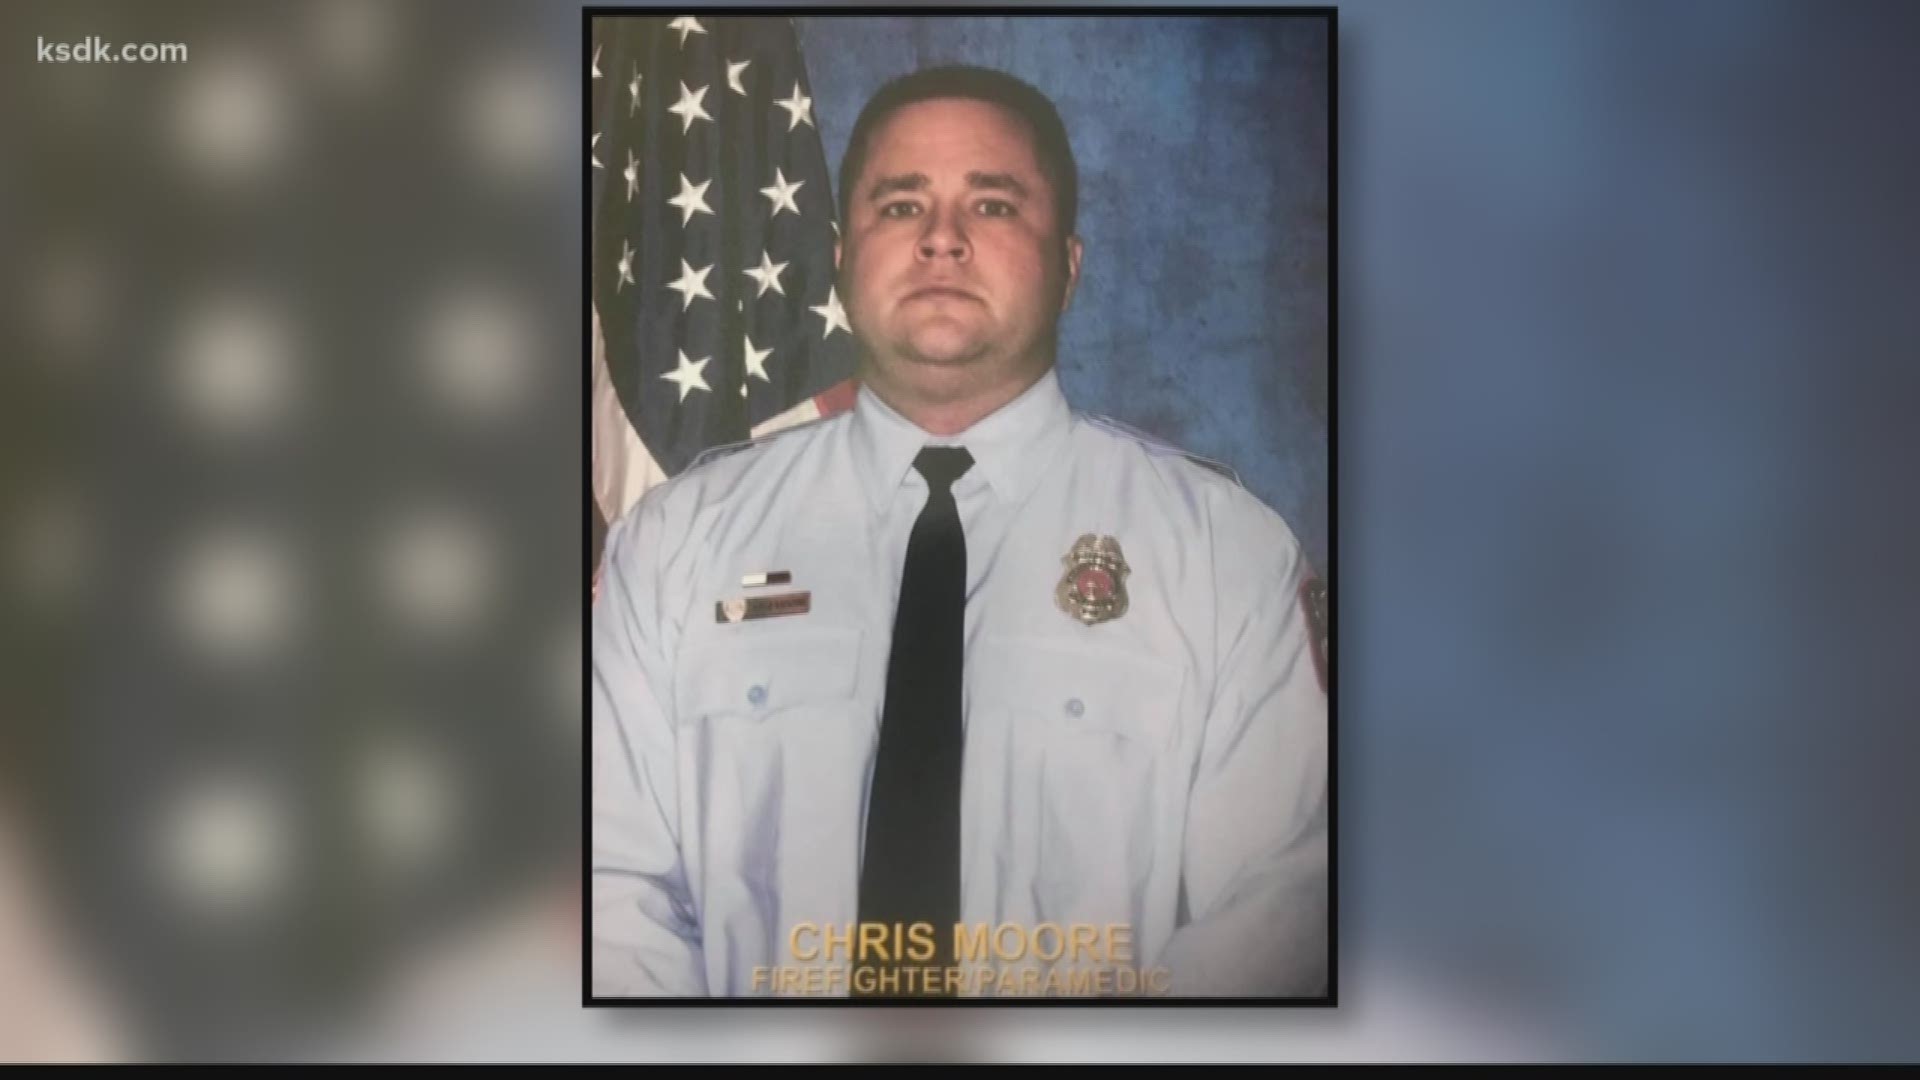 A firefighter-paramedic with the Maryland Heights Fire Protection District was transported to a funeral home Sunday morning with full honors.